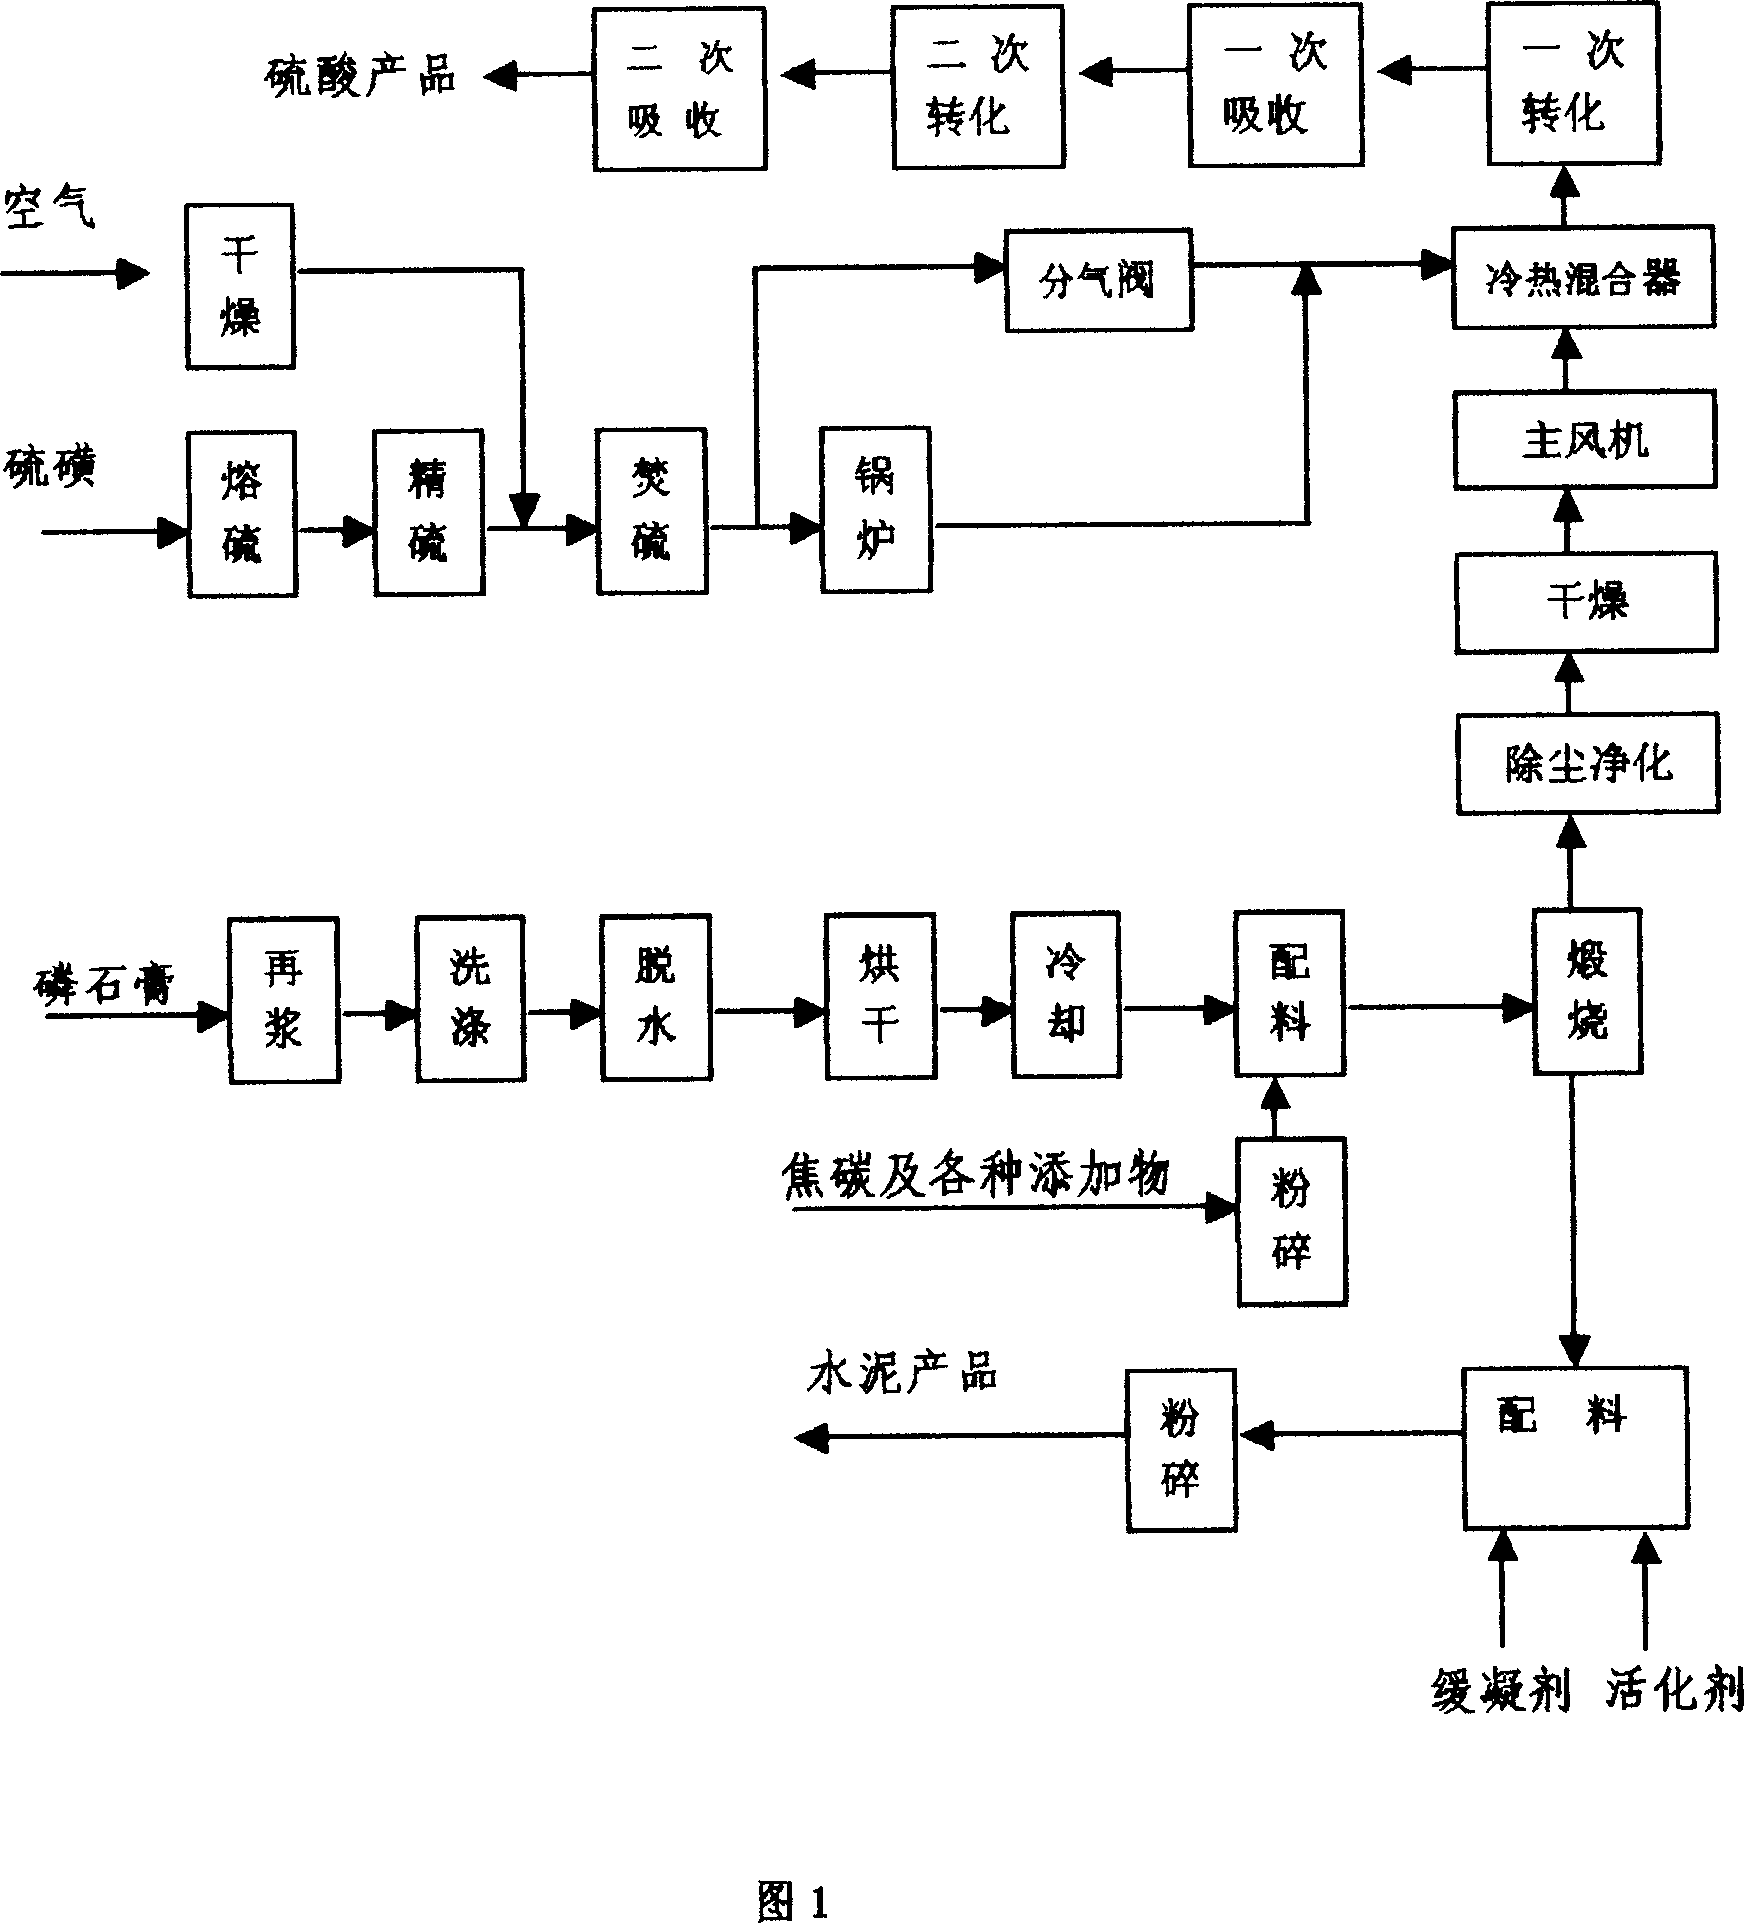 Coproducing cement technological method of producing acid using phosphogypsum and sulfur